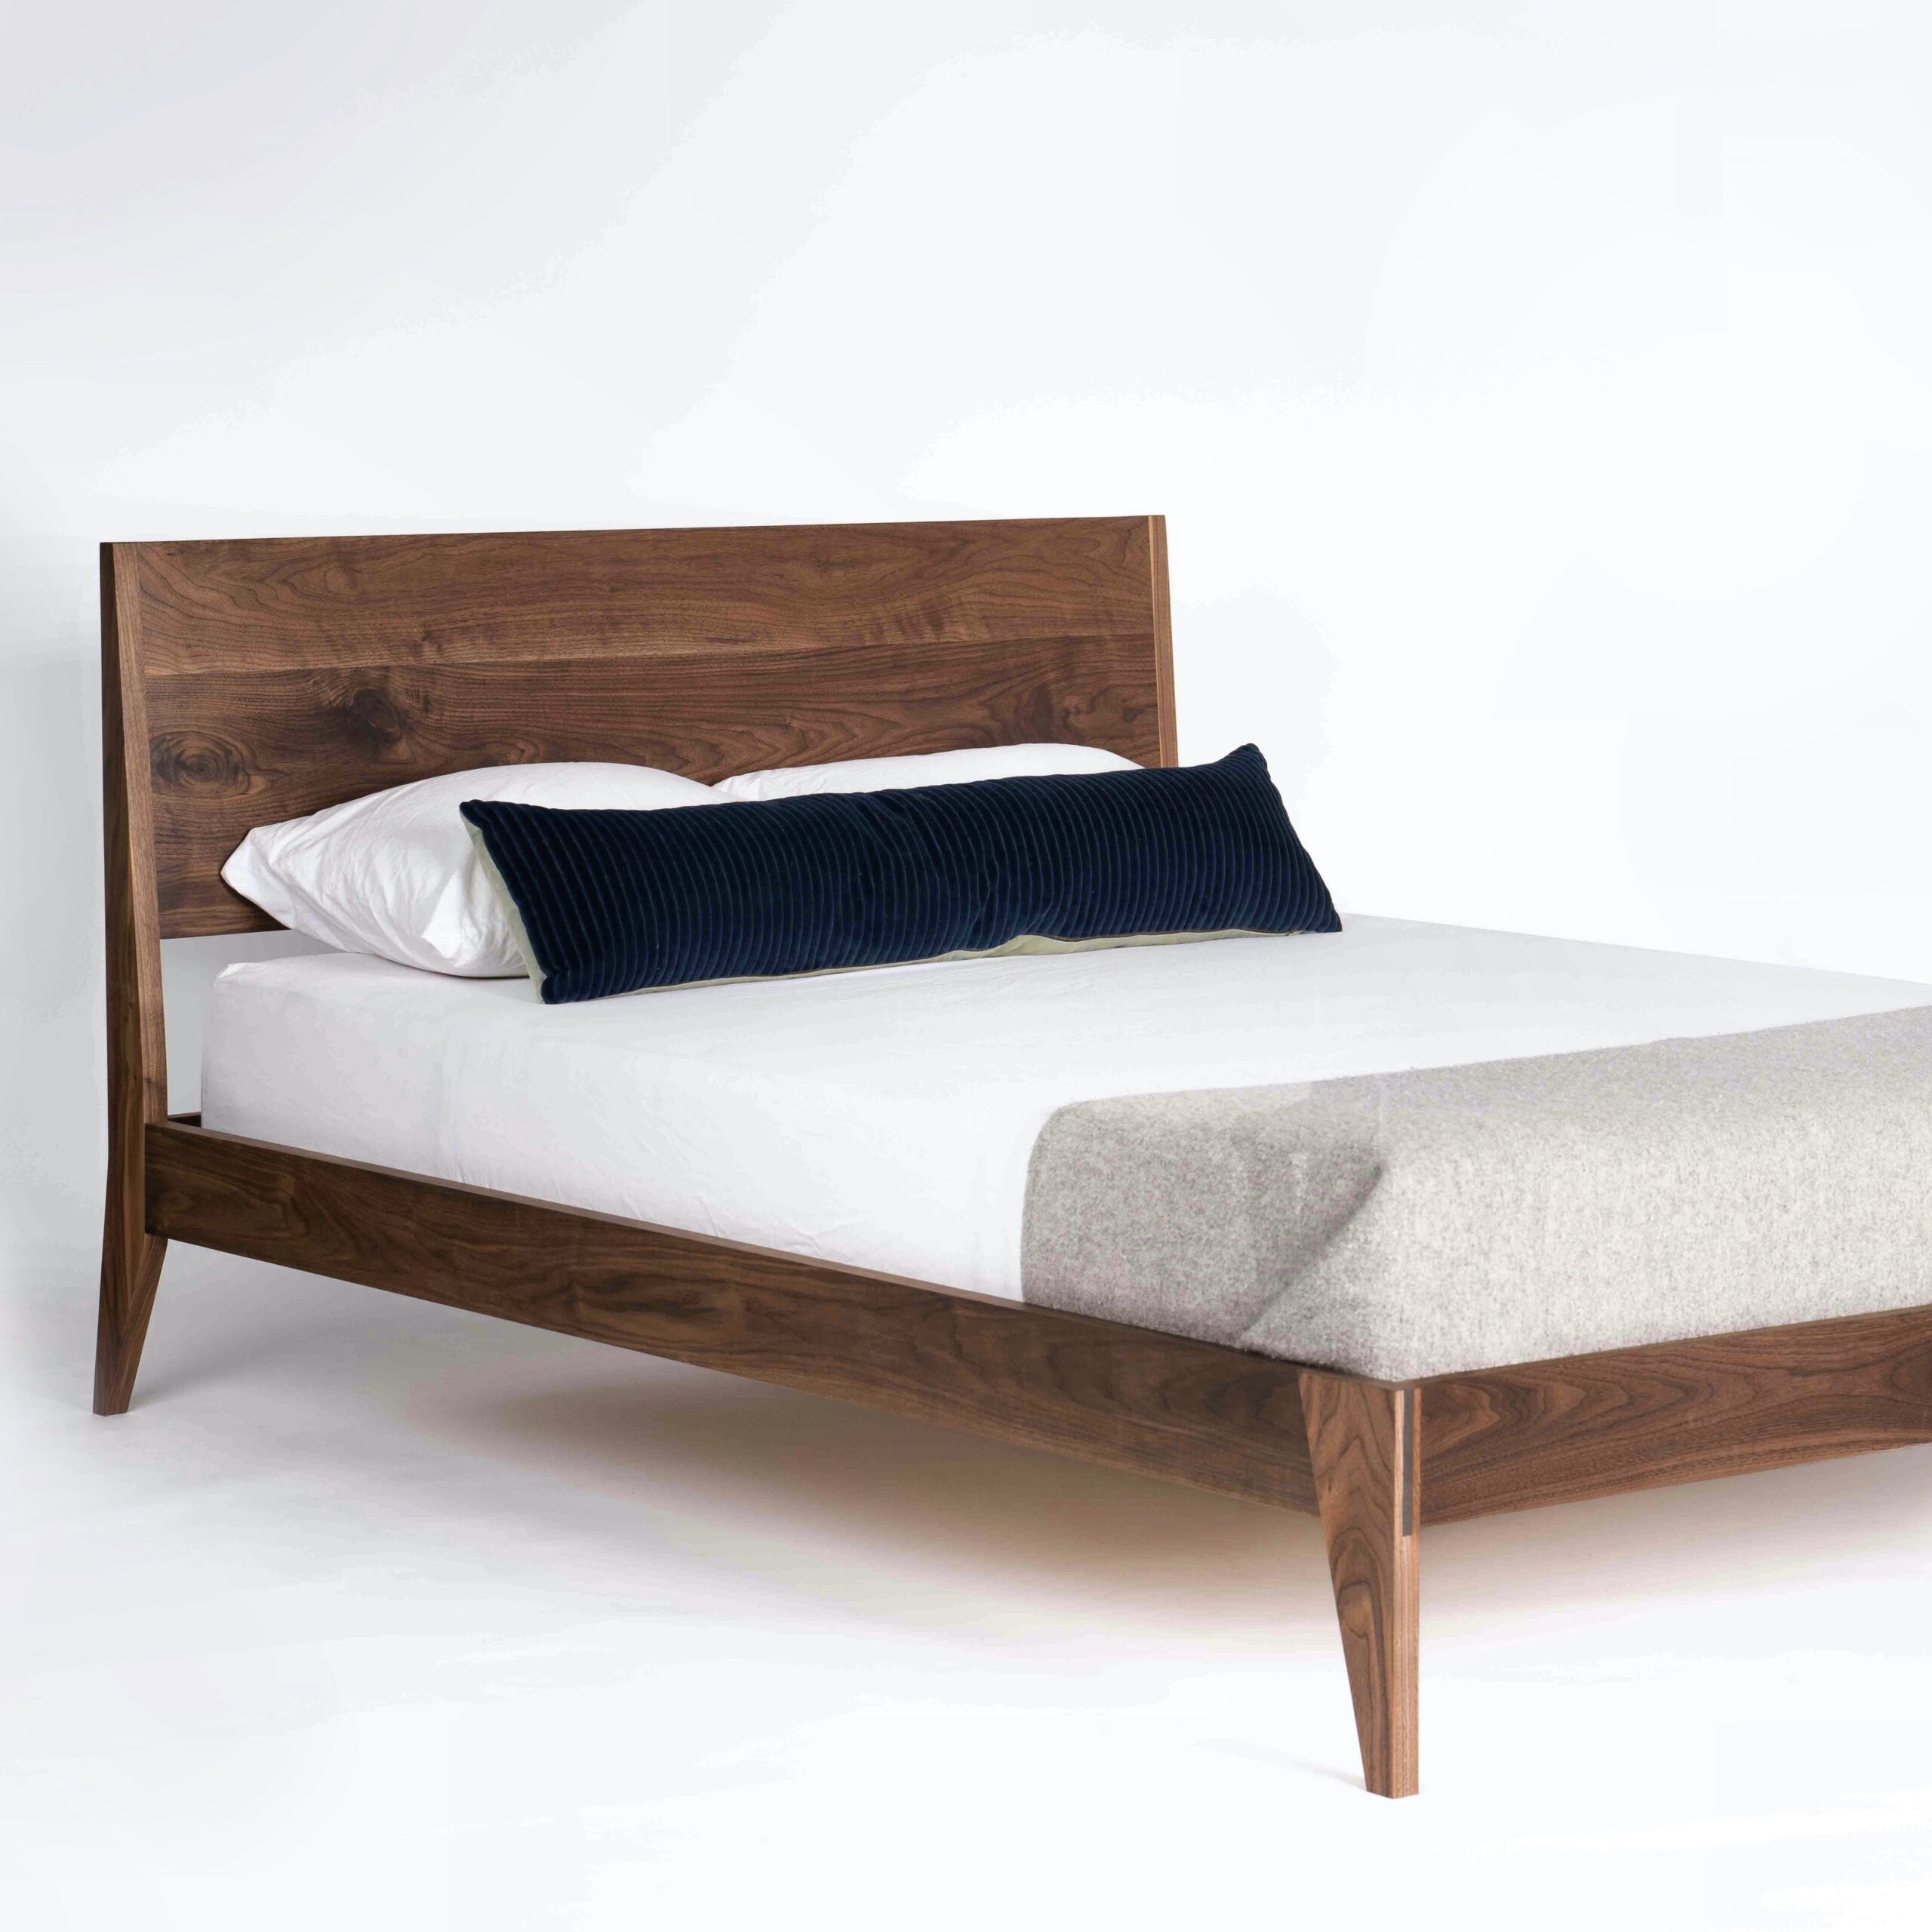 A simple all solid walnut bed with a mattress and pillows on it. Mortise and tenon joinery used at the footboard.